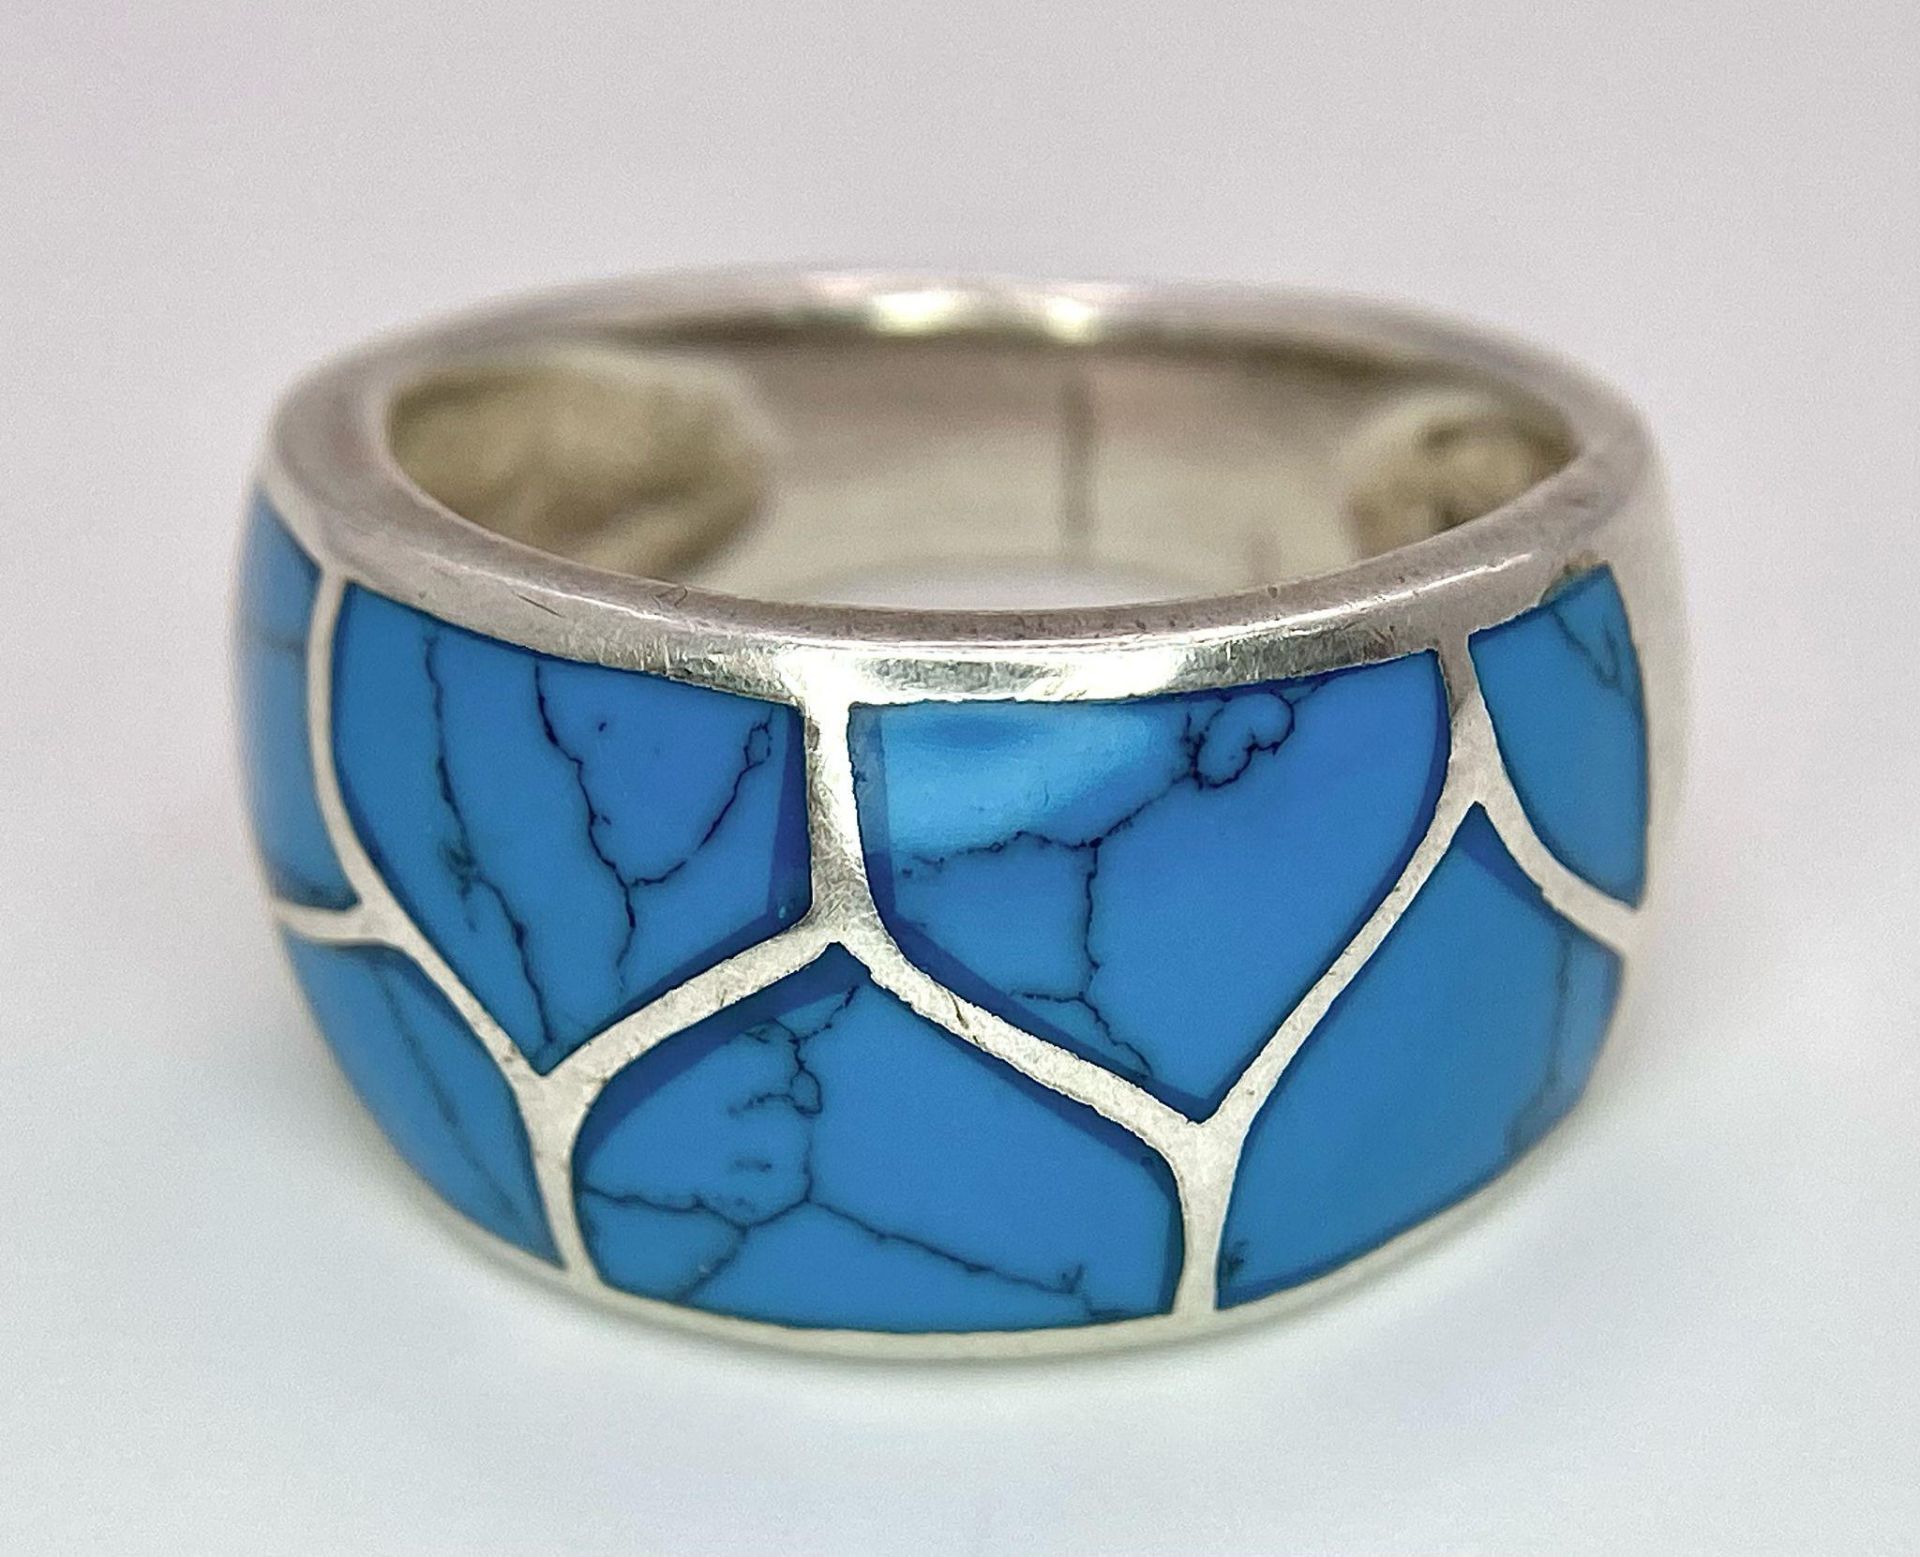 A LARGE STERLING SILVER AND TURQUOISE INLAY BAND RING, WEIGHT 6.4G, SIZE P ,REF SC 4127 - Image 3 of 5